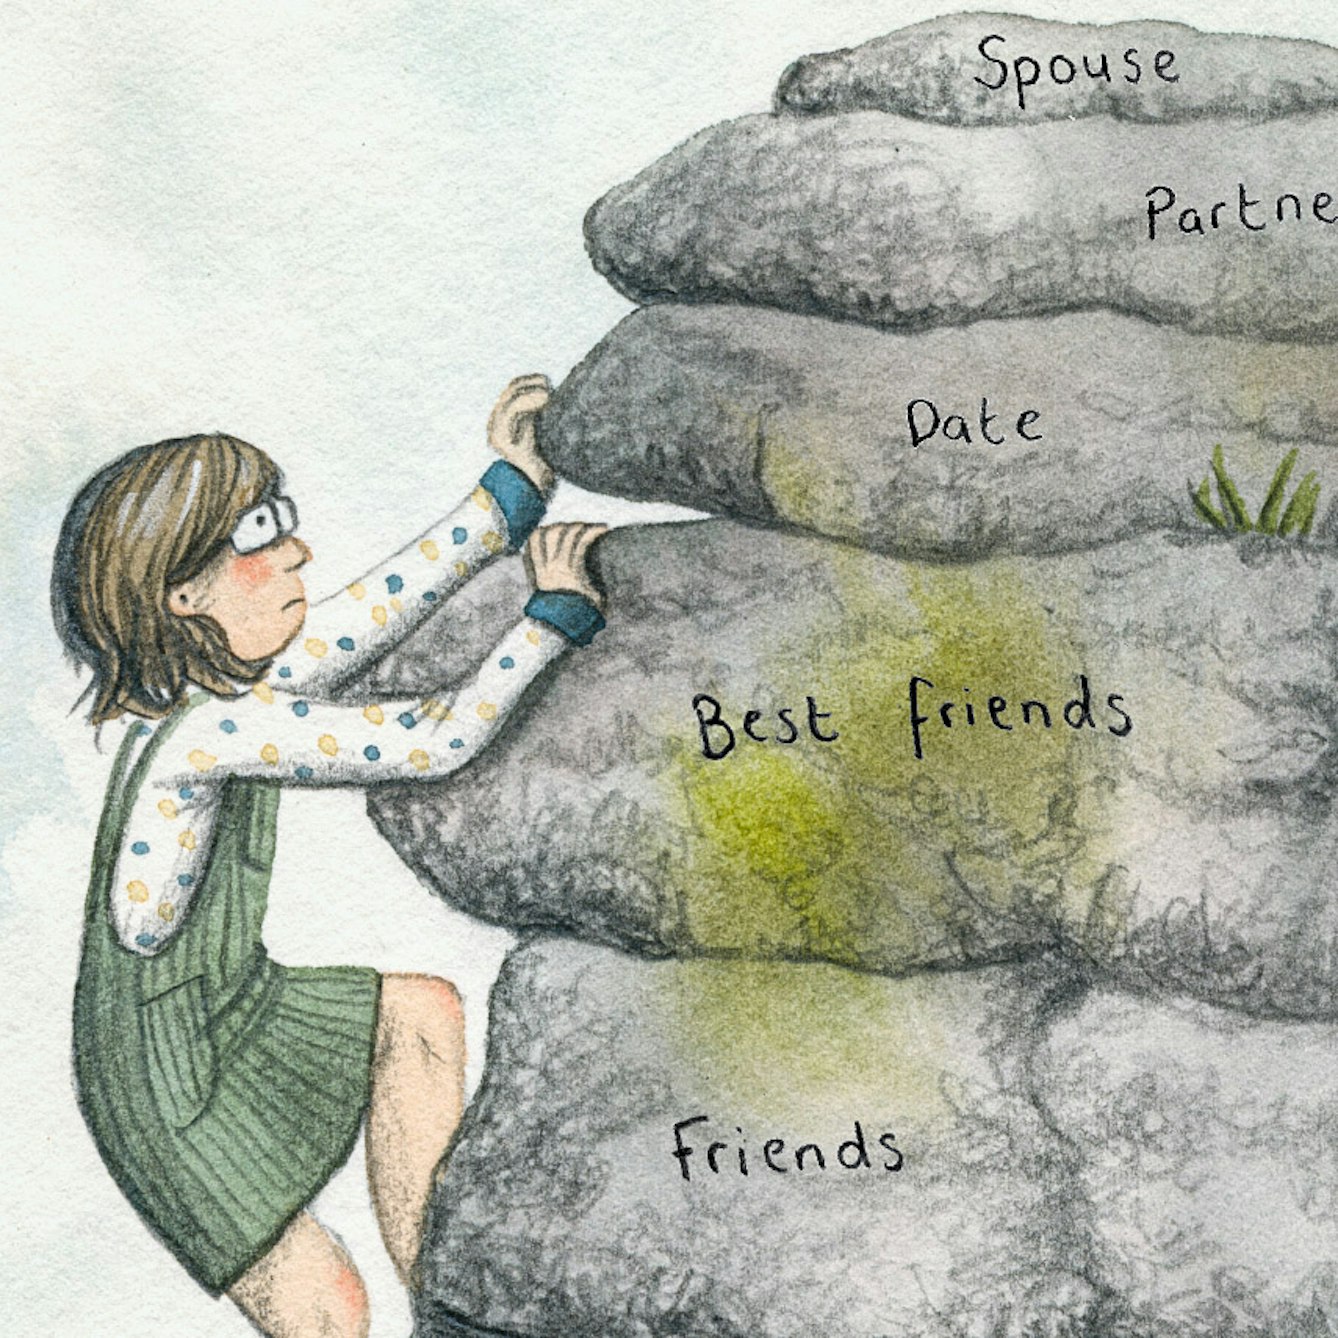 Colourful illustration showing a person with shoulder length brown hair climbing up a stack of rocks. They are wearing glasses, a polka dot top and a green dungaree dress. Each rock has text on it, reading from bottom to top 'Friends. Best friends. Date. Partner. Spouse'.

Inset to the main illustration is a panel showing a hand placing a small rock on top of the pile. Text above reads '... with sex at the very top'.